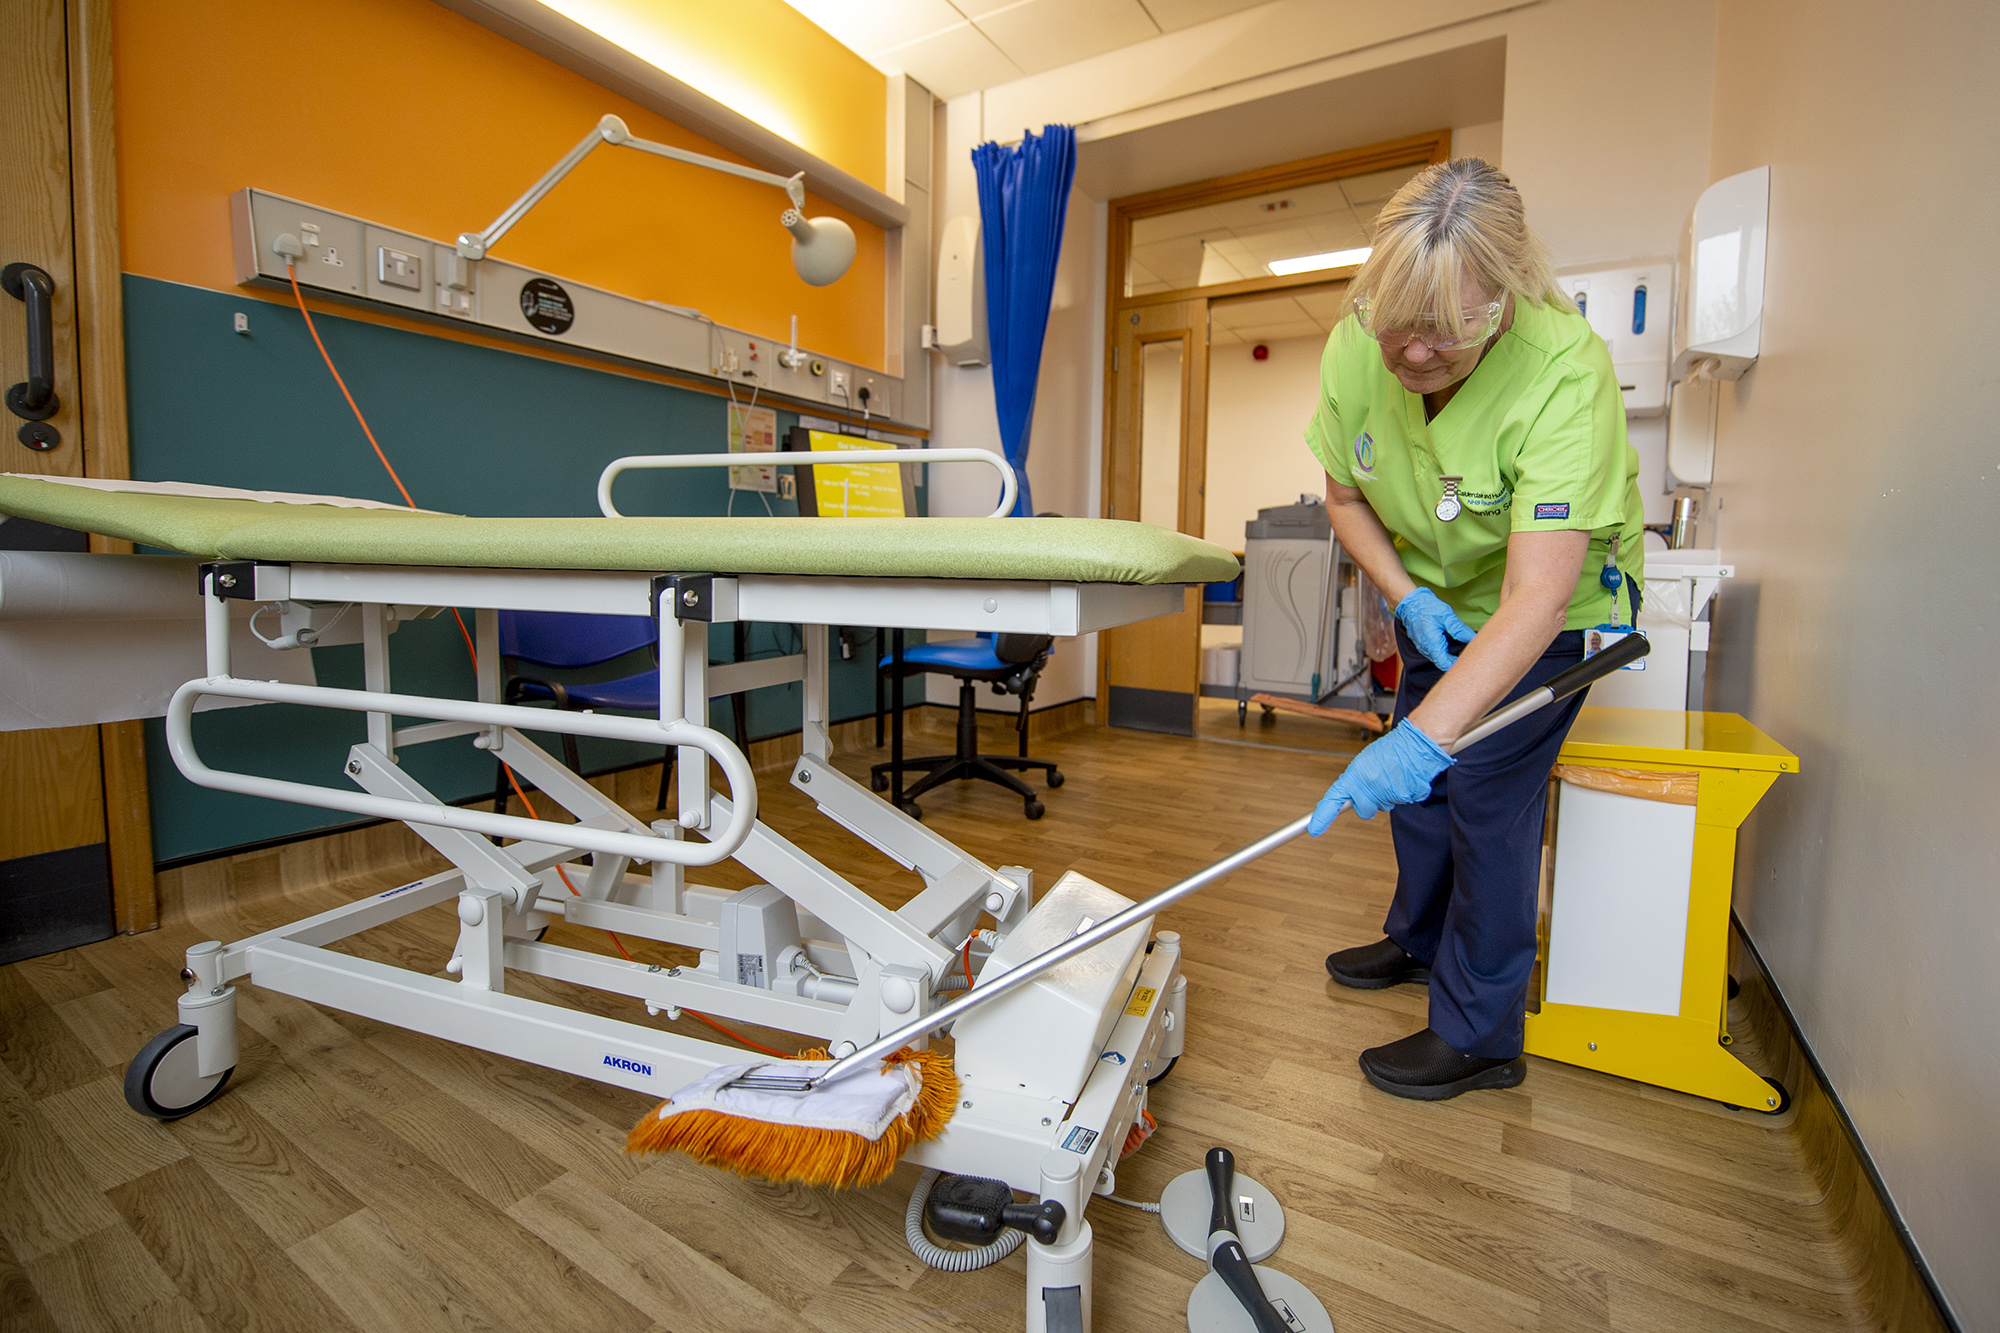 Female staff member cleaning a hospital bed.